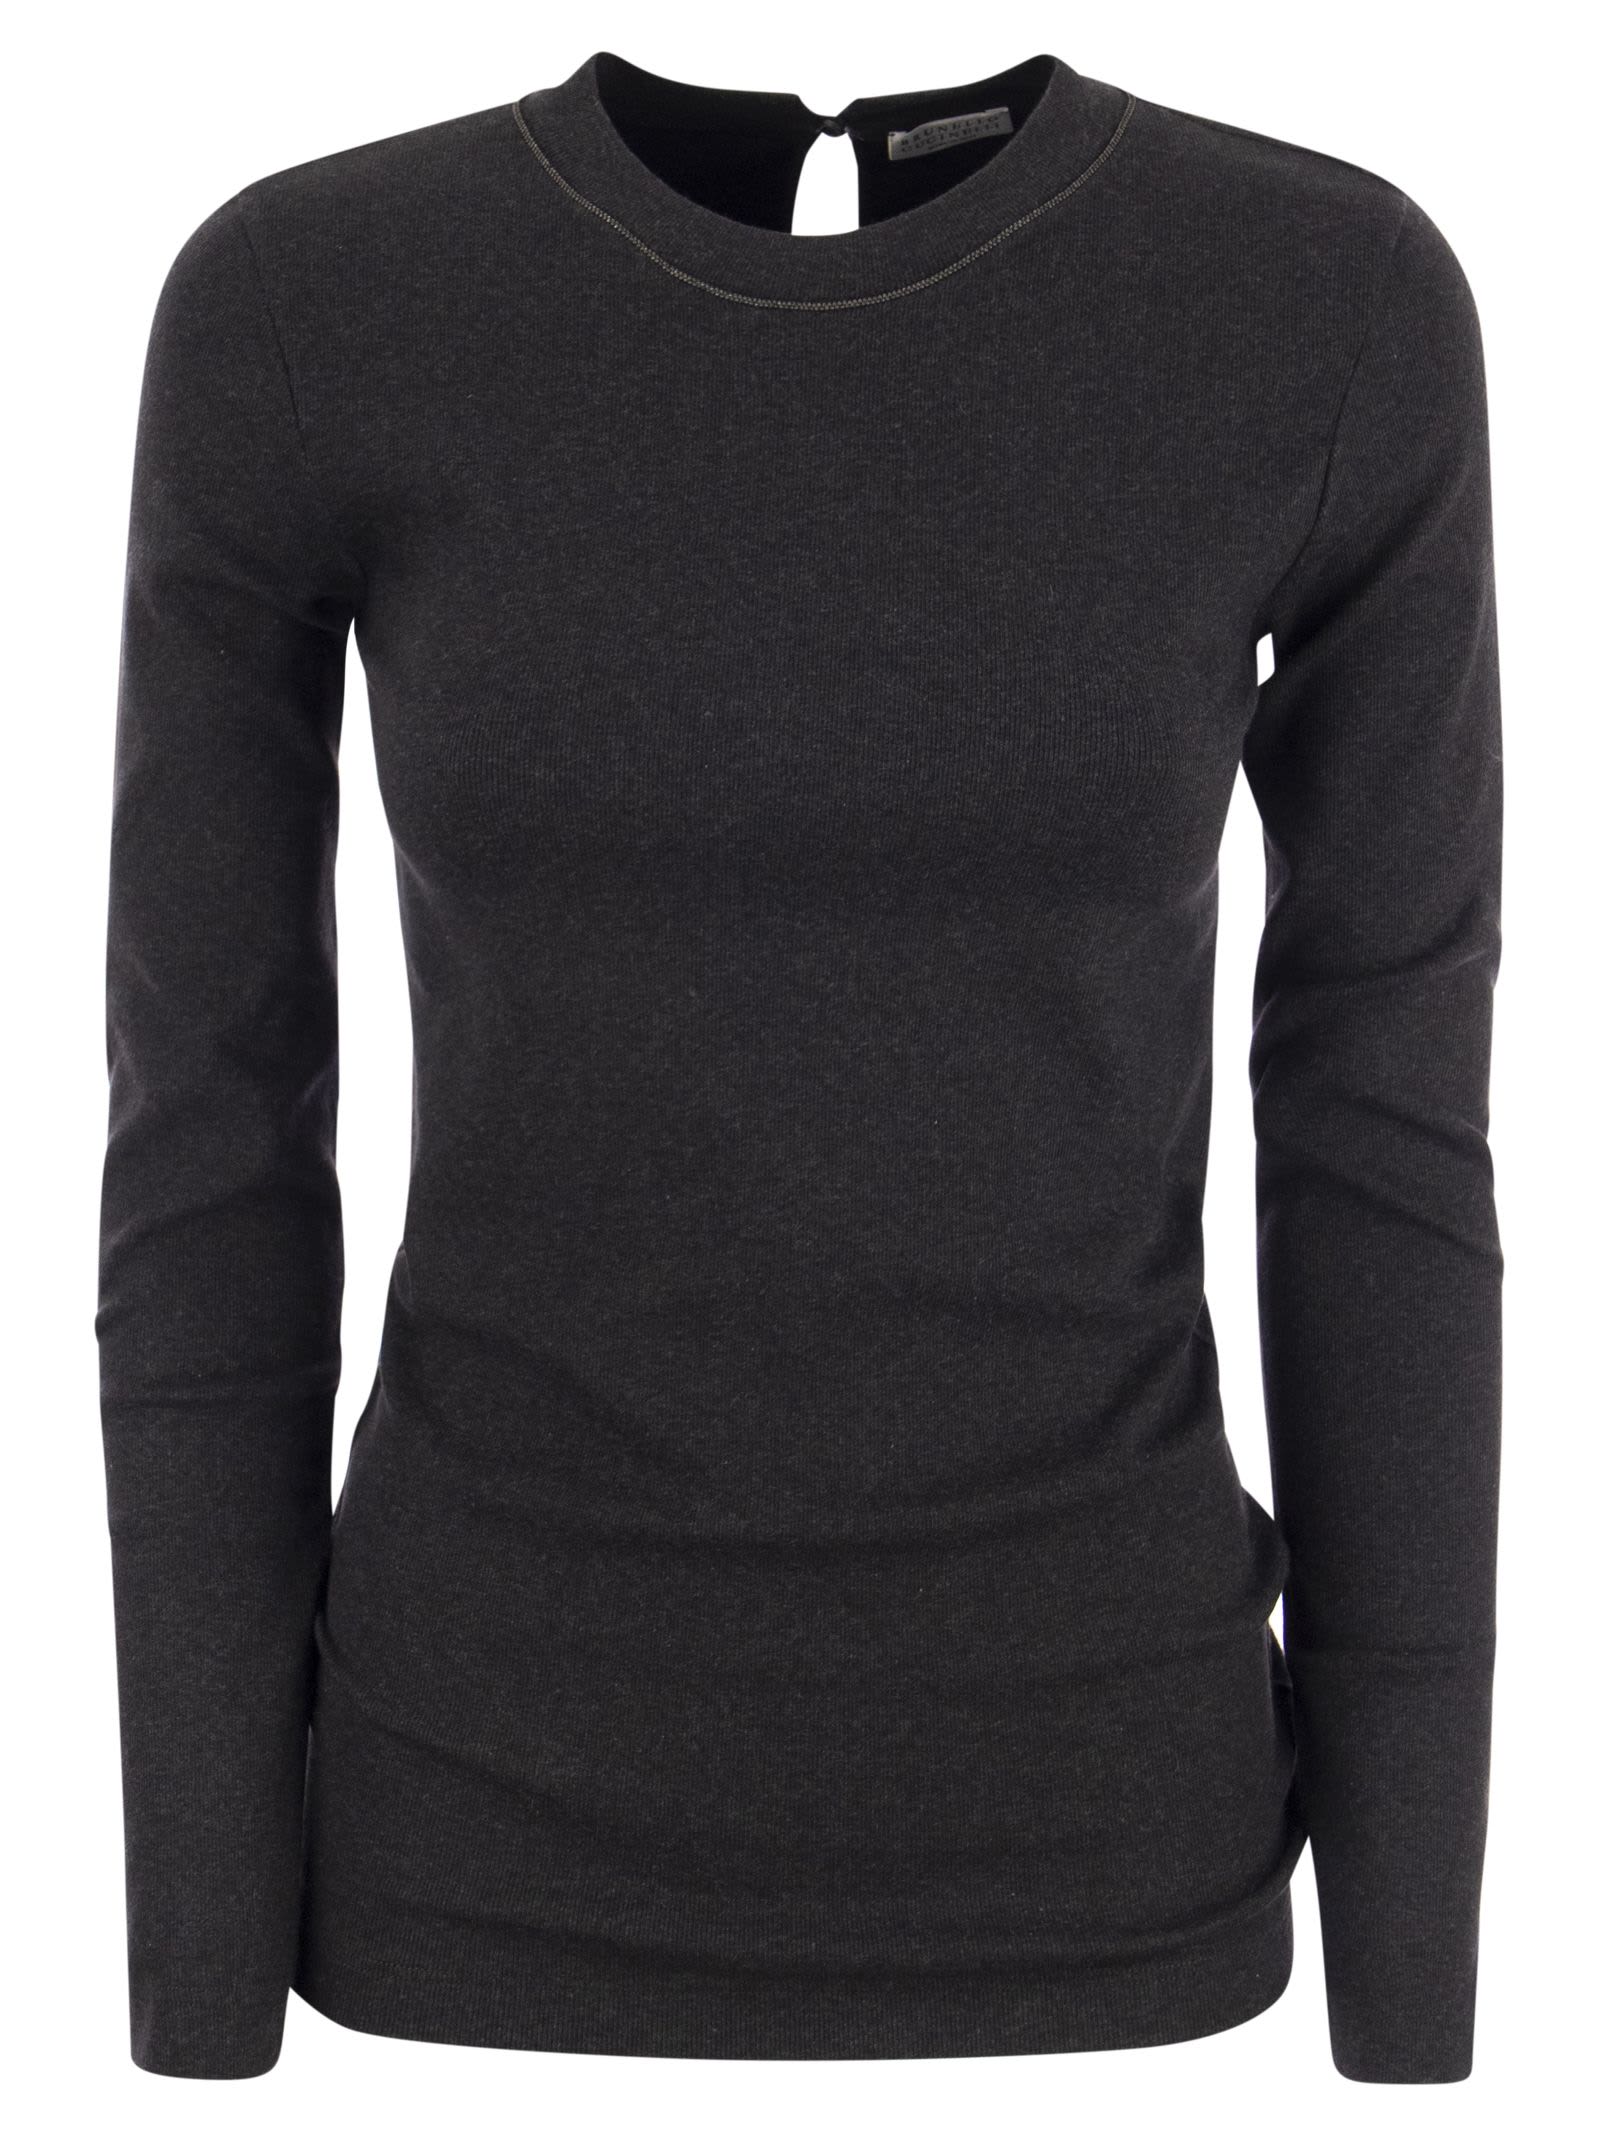 BRUNELLO CUCINELLI RIBBED STRETCH COTTON JERSEY T-SHIRT WITH JEWELLERY